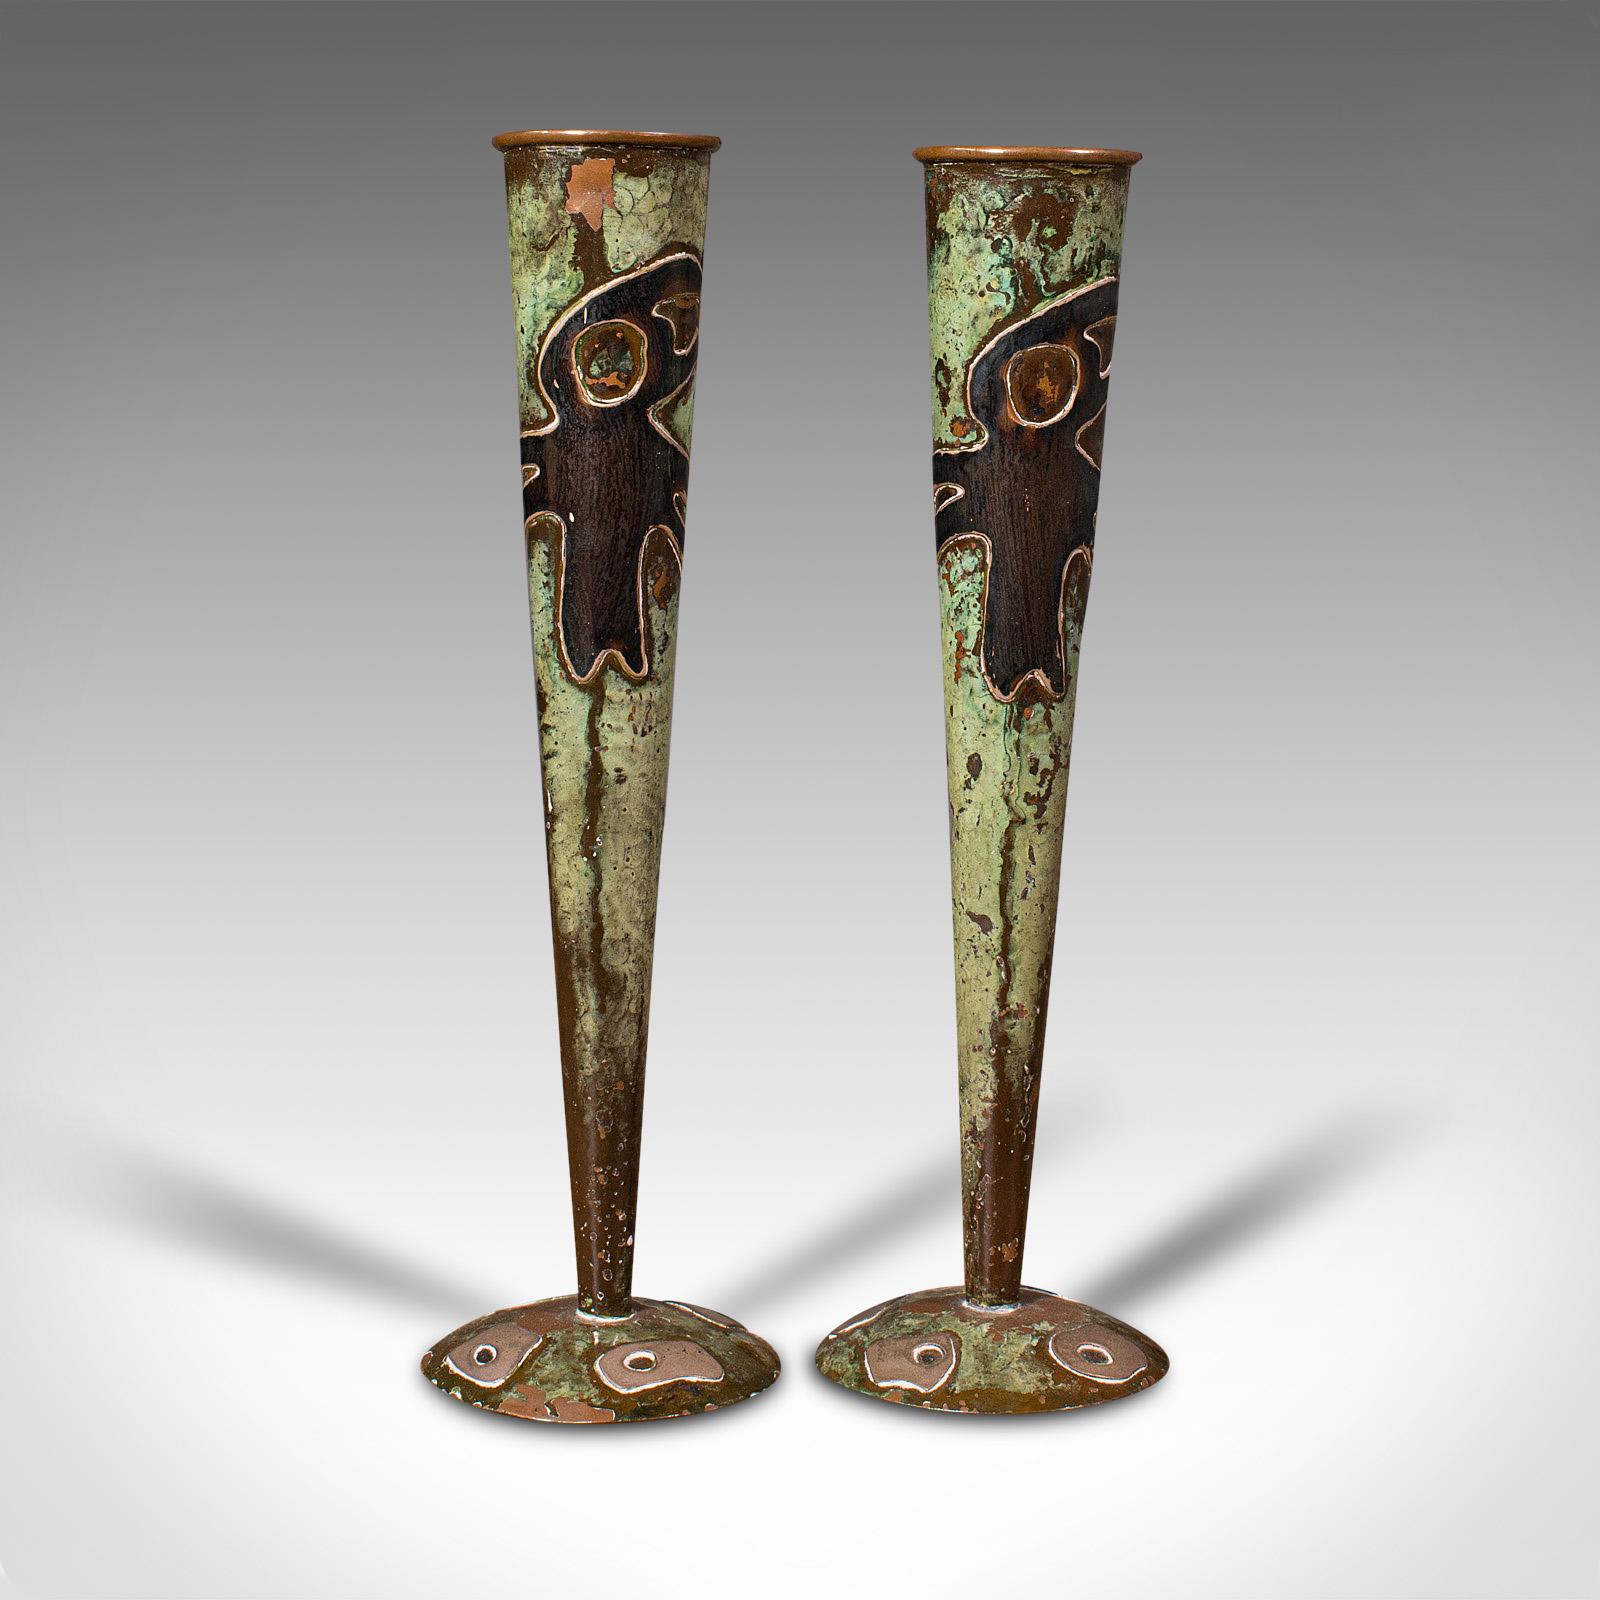 This is an antique pair of flute vases. A French, copper posy vase in Art Nouveau taste, dating to the early 20th century, circa 1920.

Charming example of the Art Nouveau taste
Displays a desirable aged patina and in good order
Patinated copper